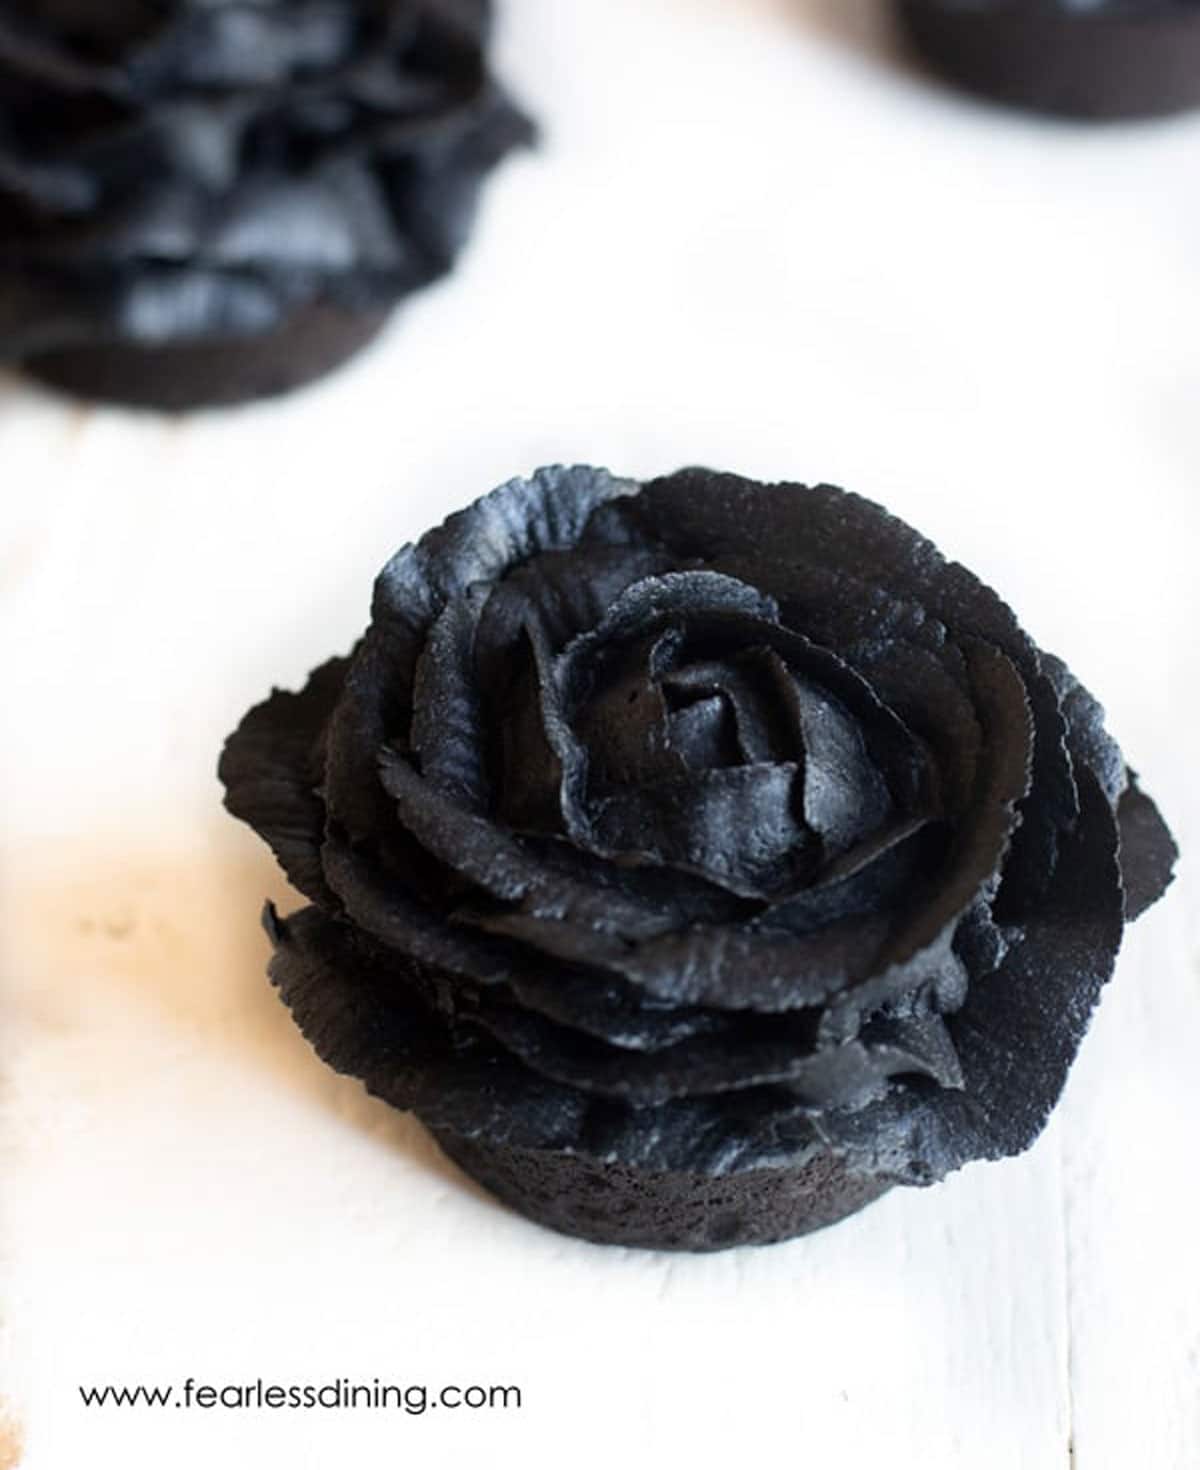 Black cupcakes frosted to look like roses.